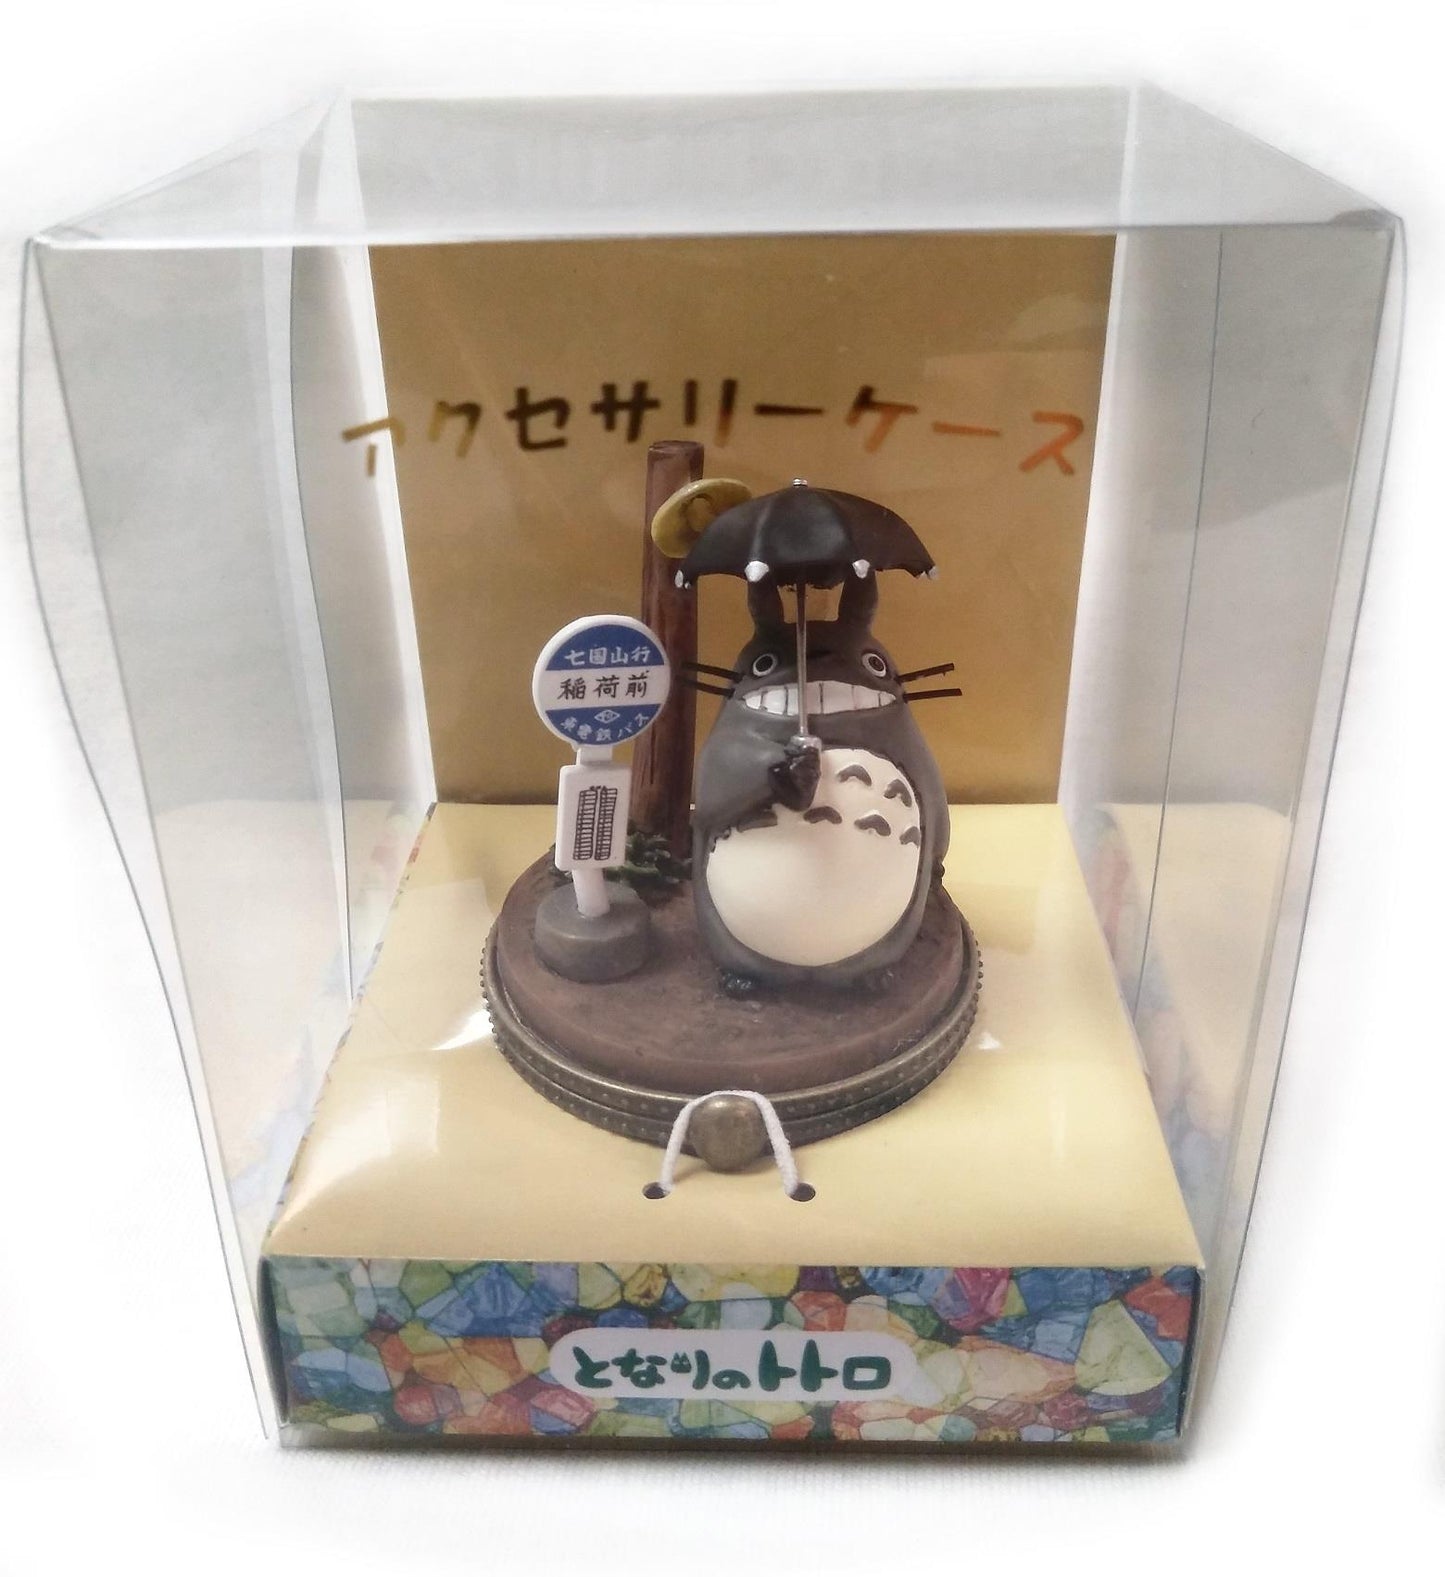 My Neighbour Totoro: Totoro at Bus Stop Accessory Case